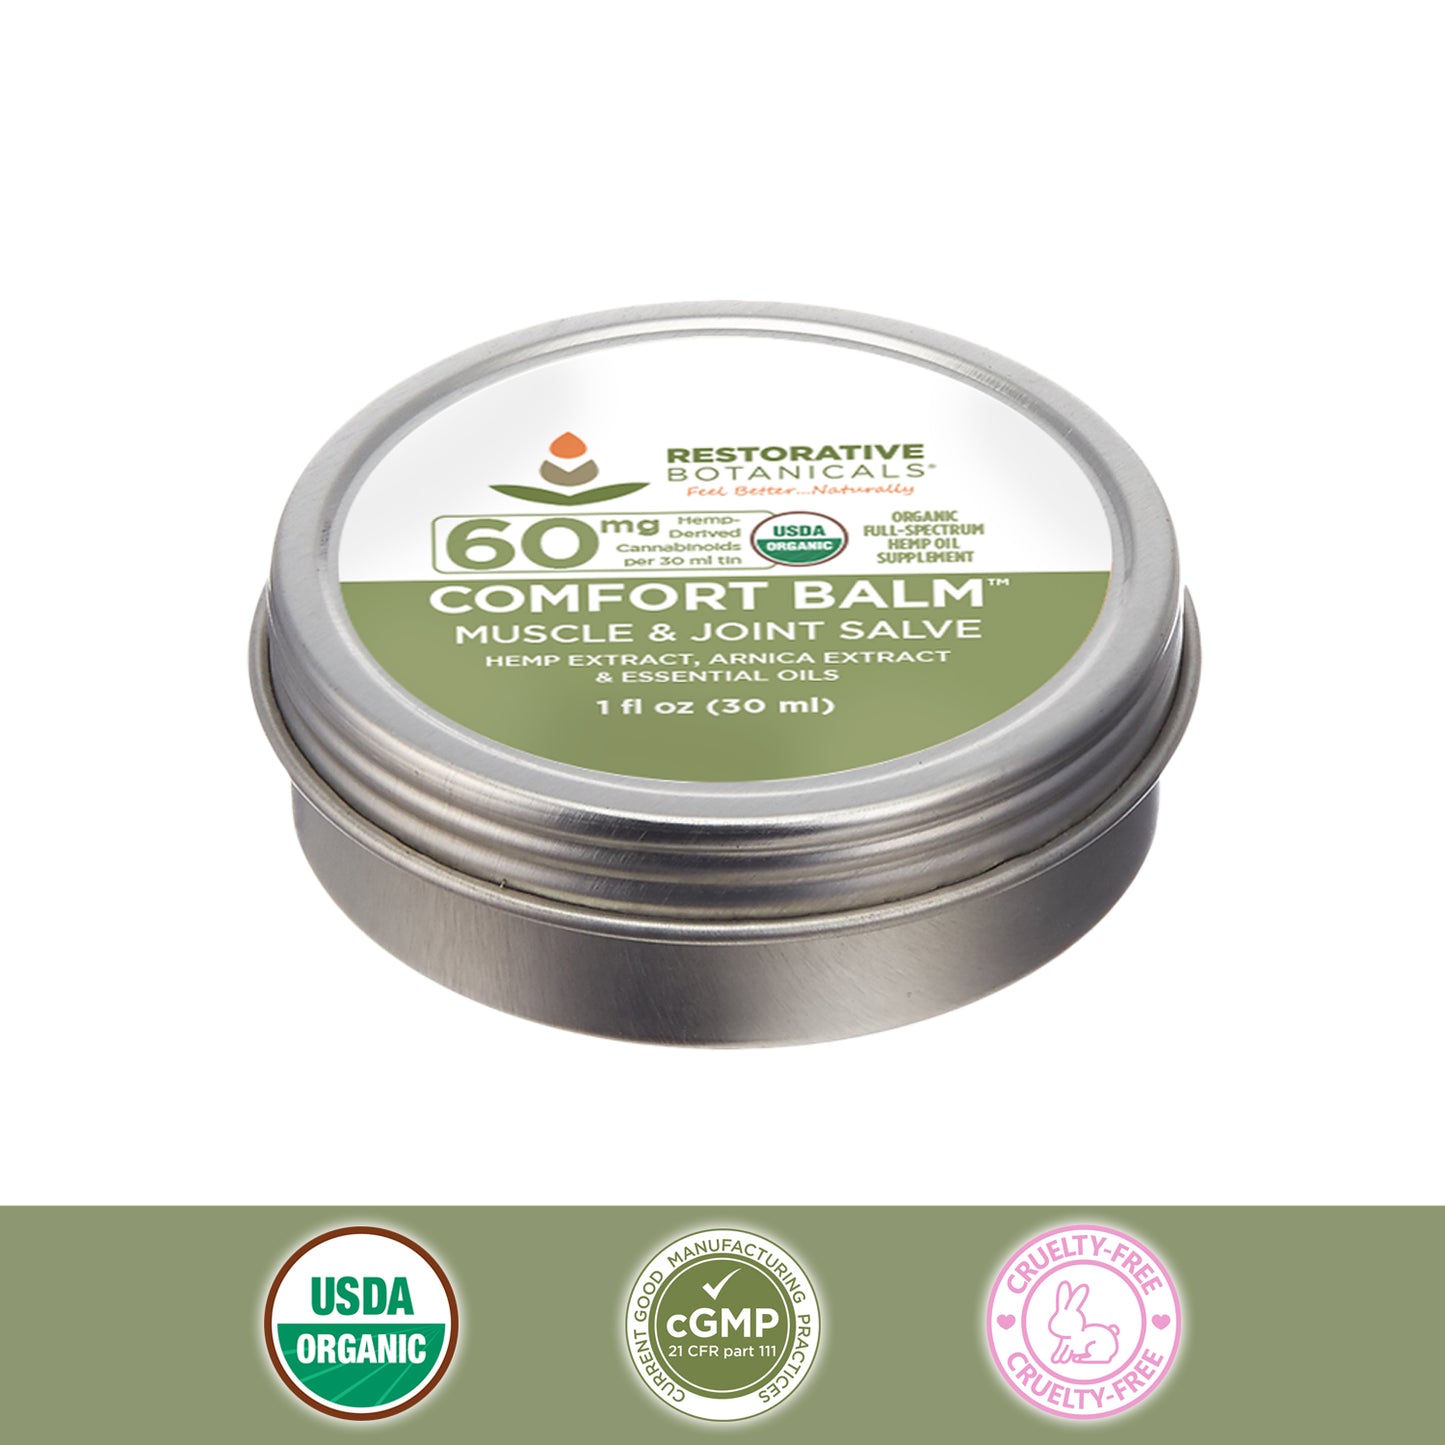 COMFORT BALM™ CBD Muscle and Joint Salve